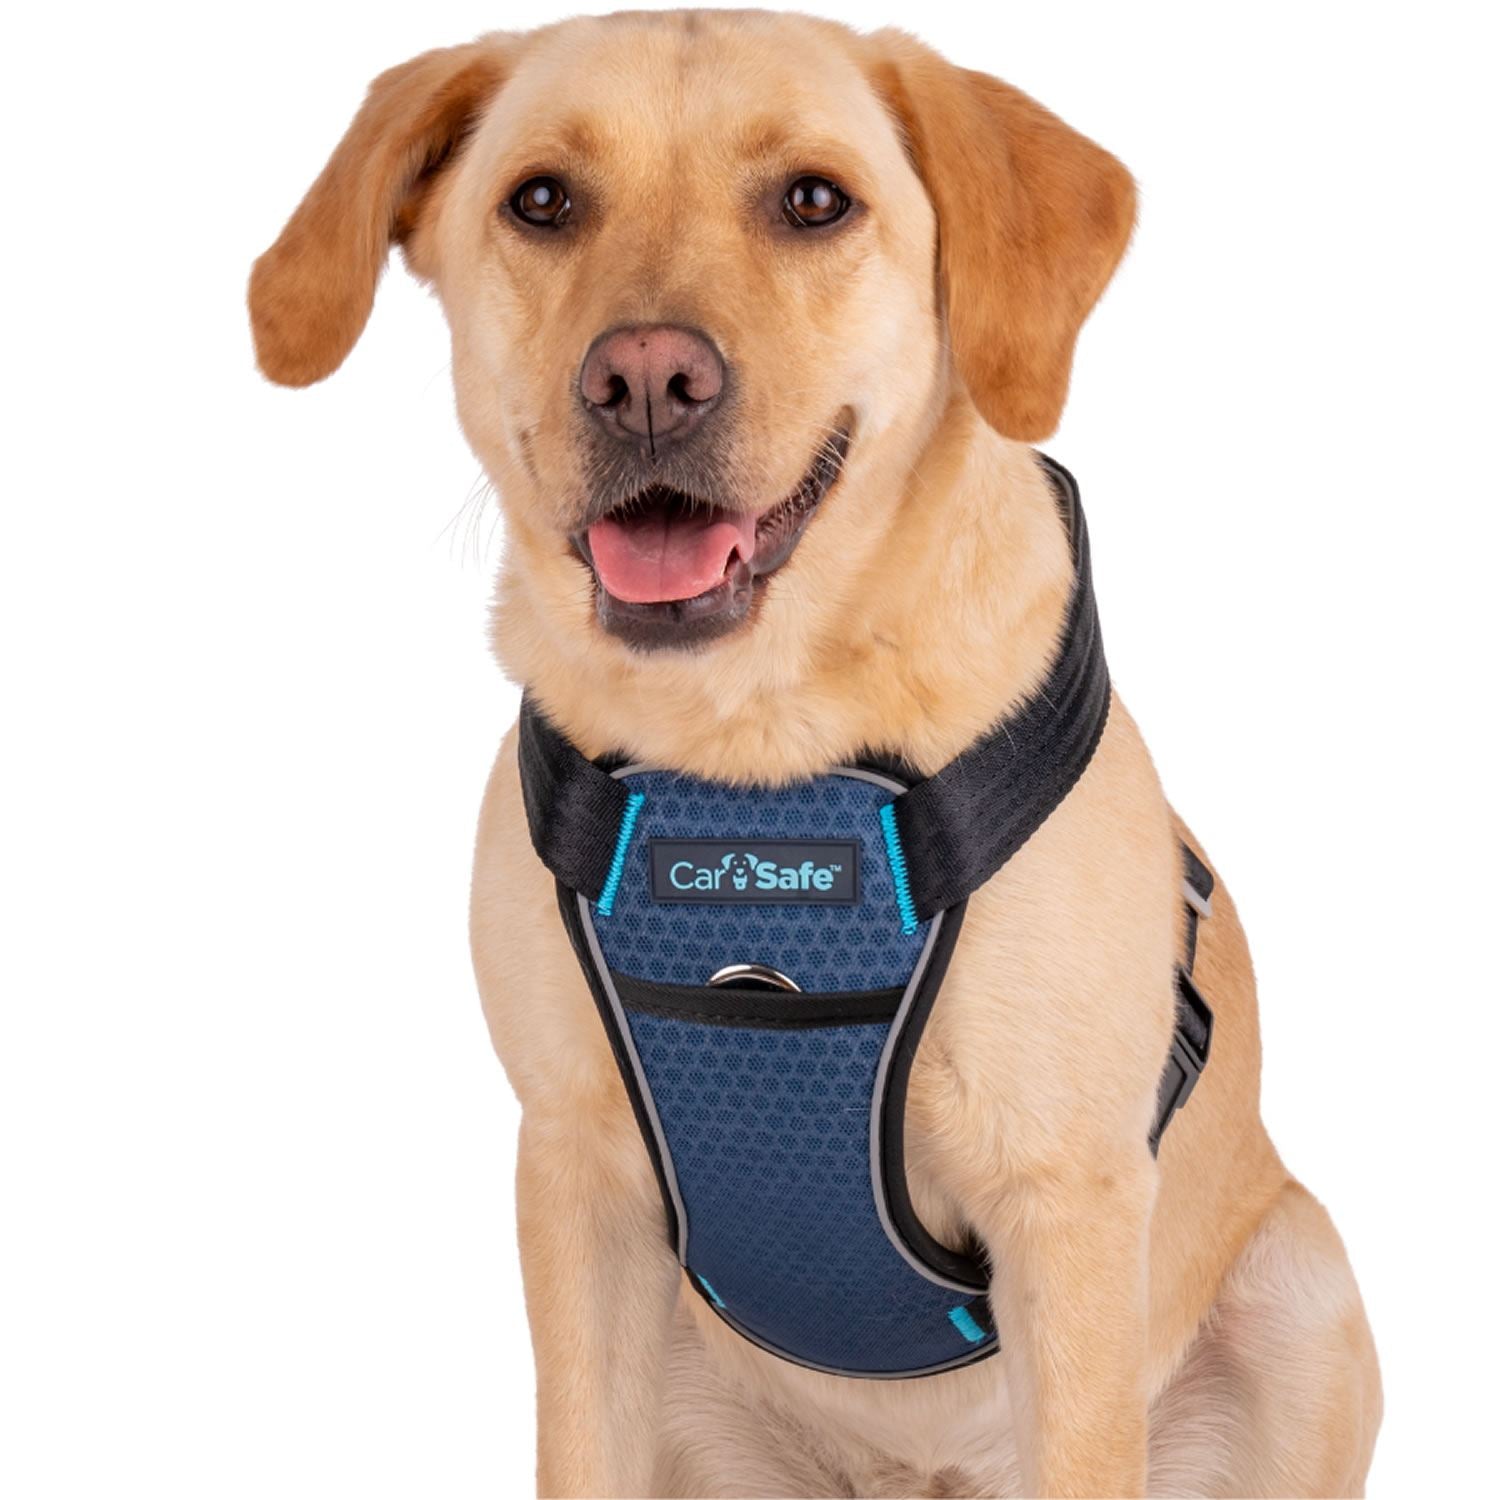 Carsafe Crash Tested Dog Harness - Just Horse Riders